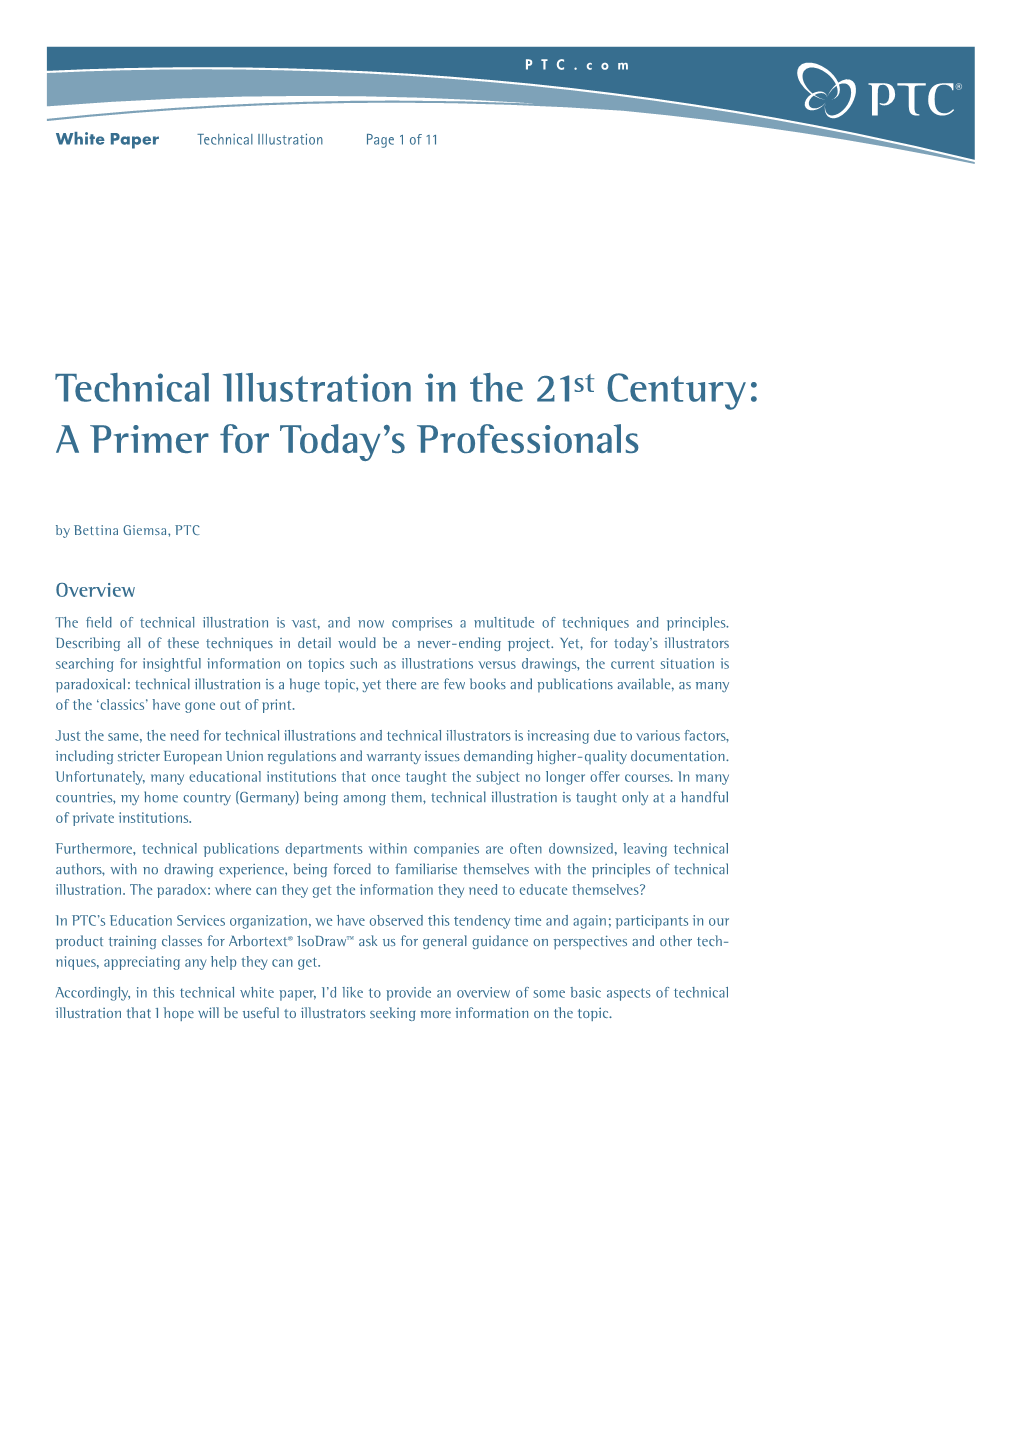 Technical Illustration in the 21St Century: a Primer for Today's